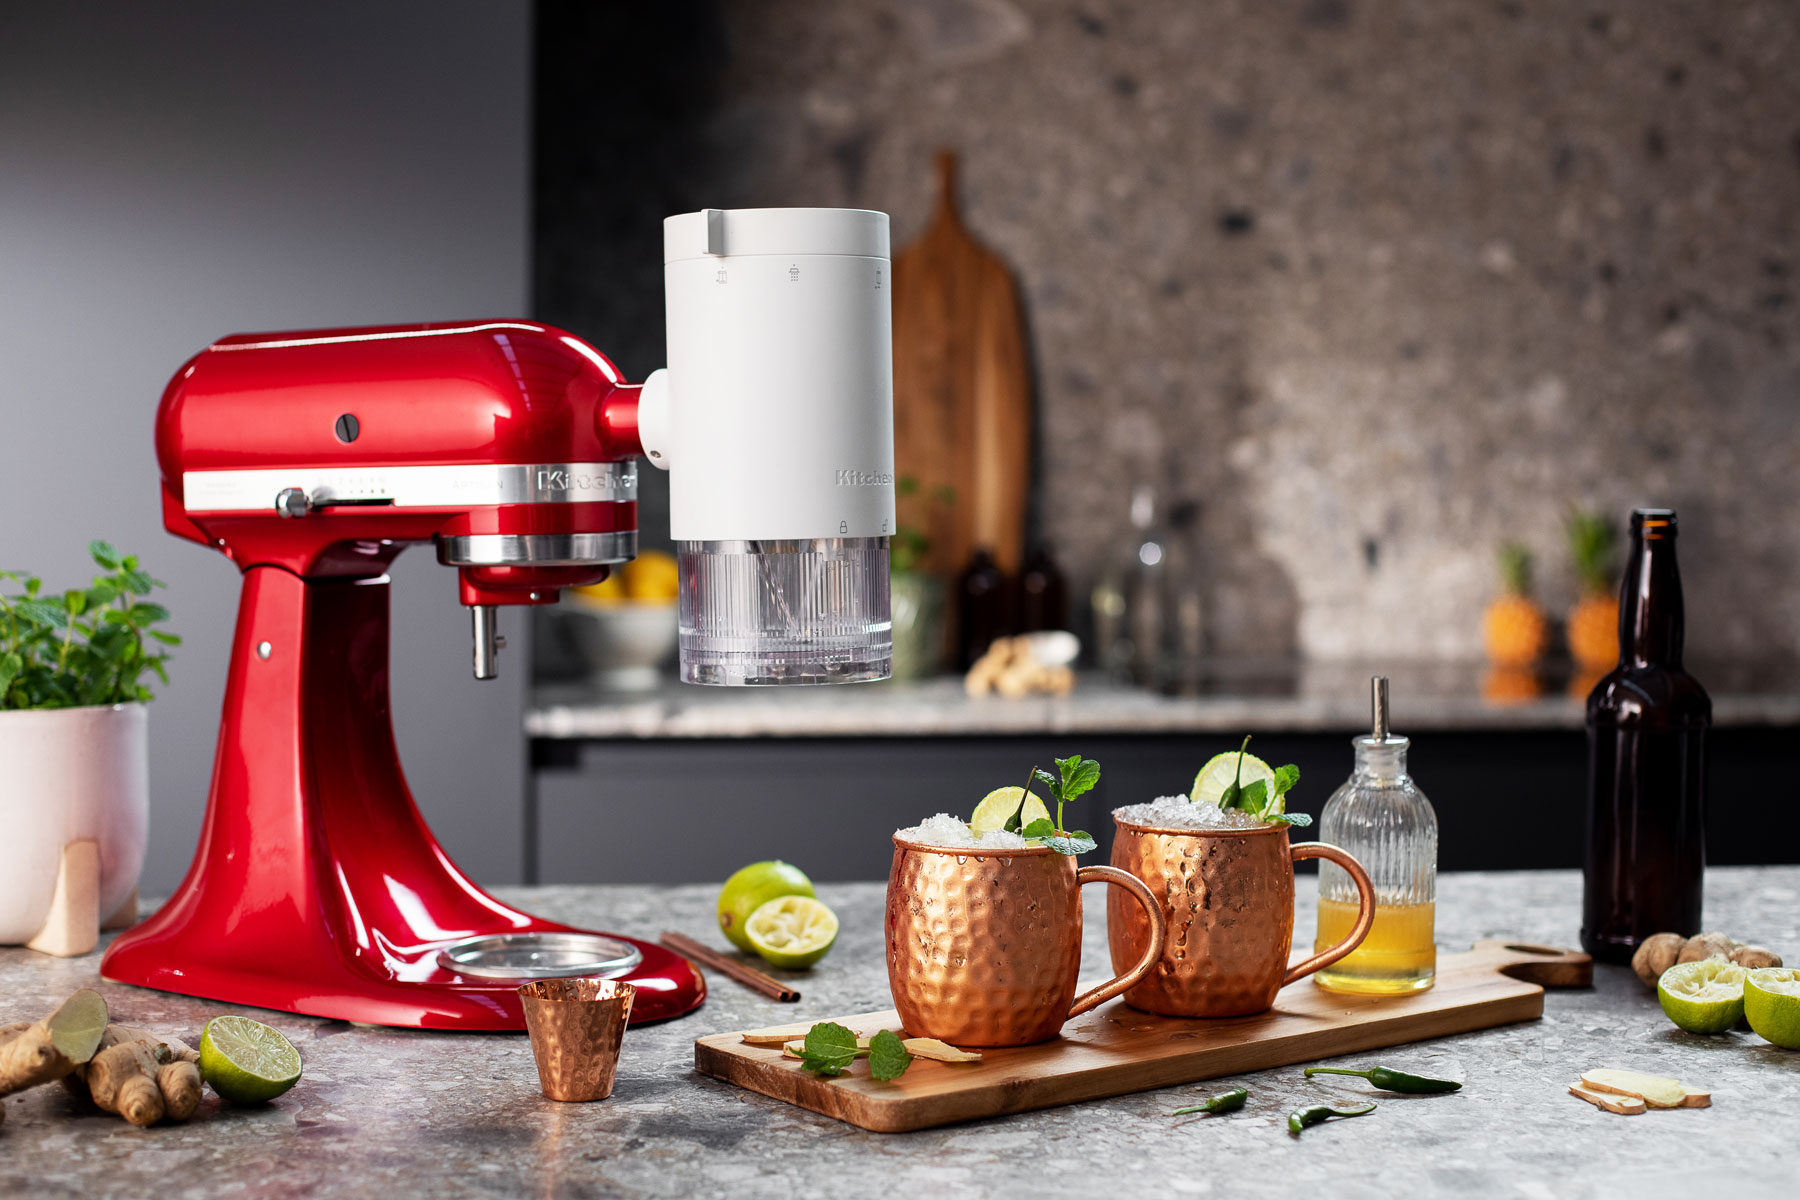 https://www.luxuriousmagazine.com/wp-content/uploads/2022/07/KitchenAid-Candy-Apple-mixer-with-Shave-ice-attachment.jpg